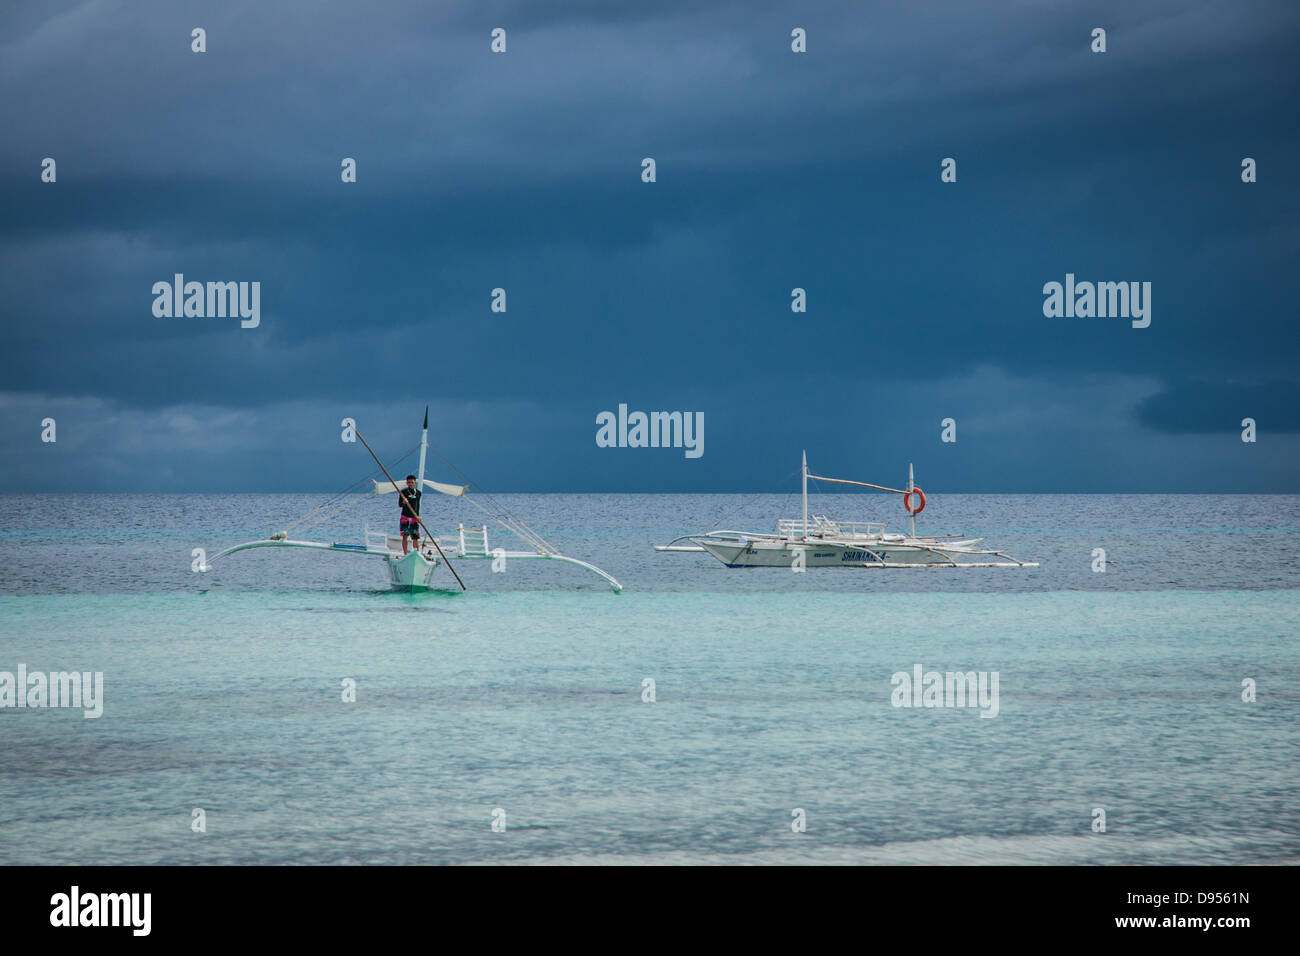 Outrigger bangka - a traditional Filipino fishing boat  with outriggers - coming in Dumaluan Beach, Panglao Island, Philippines Stock Photo